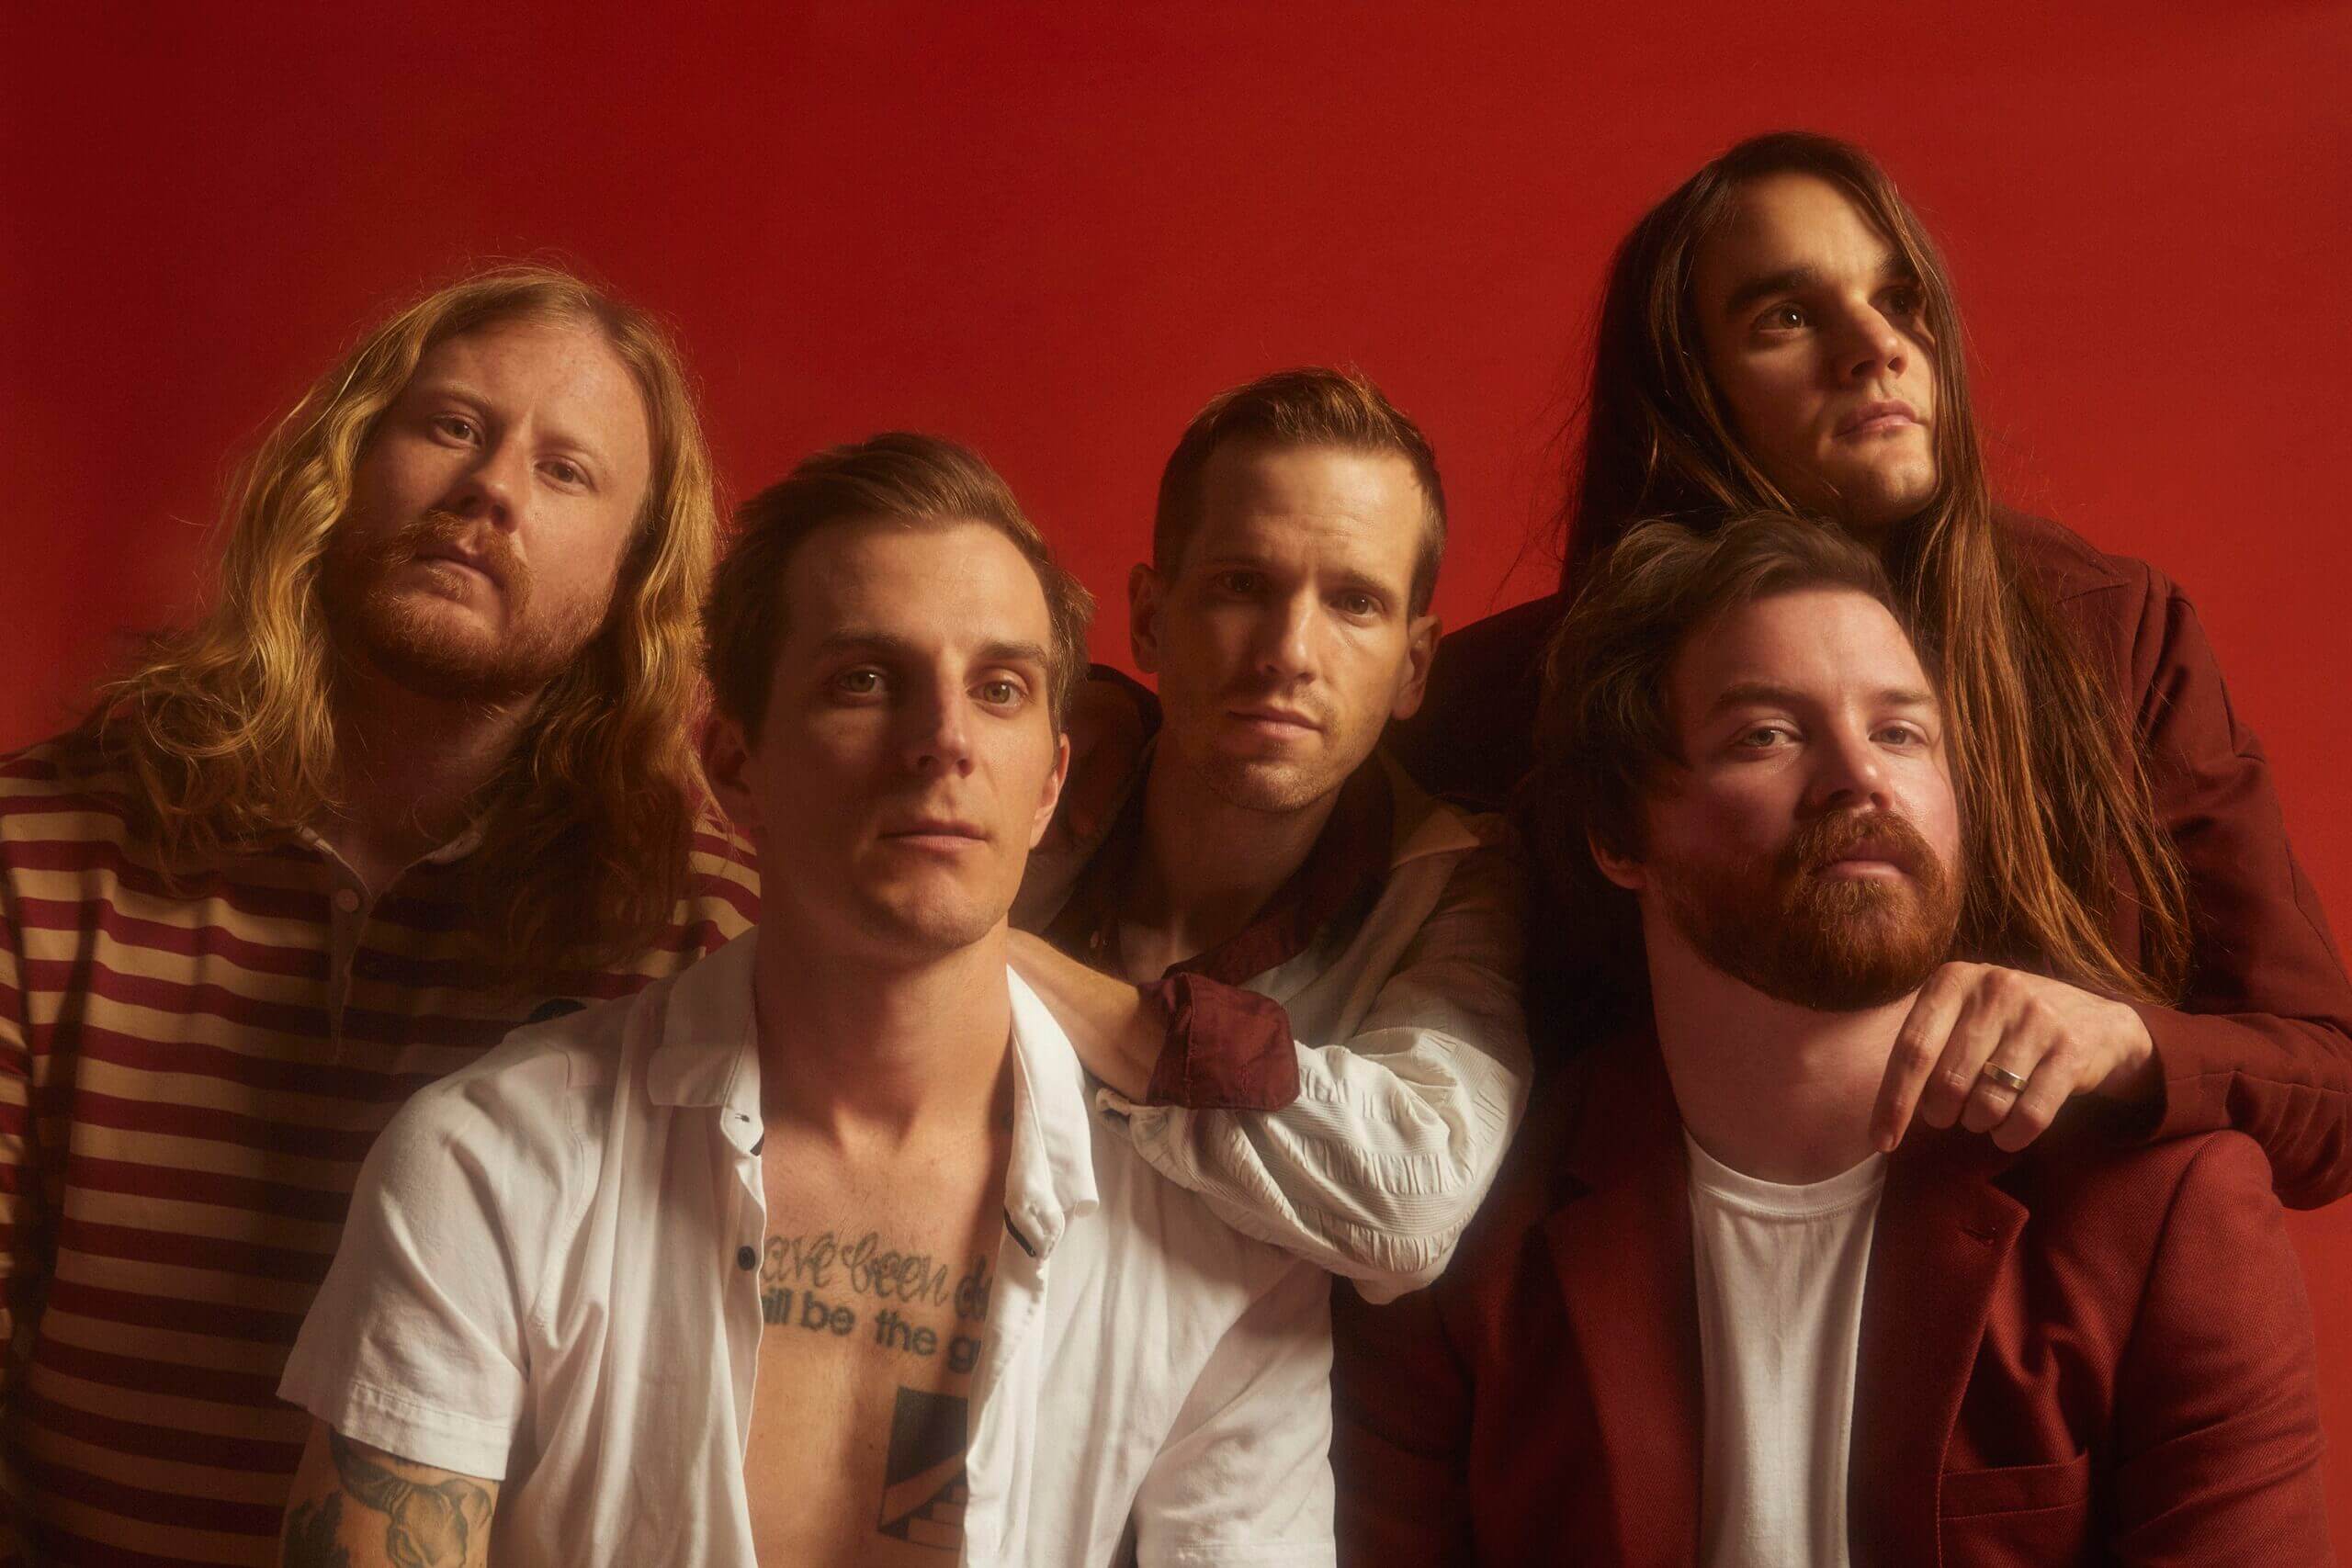 THE MAINE RELEASE NEW SINGLE “LIPS”